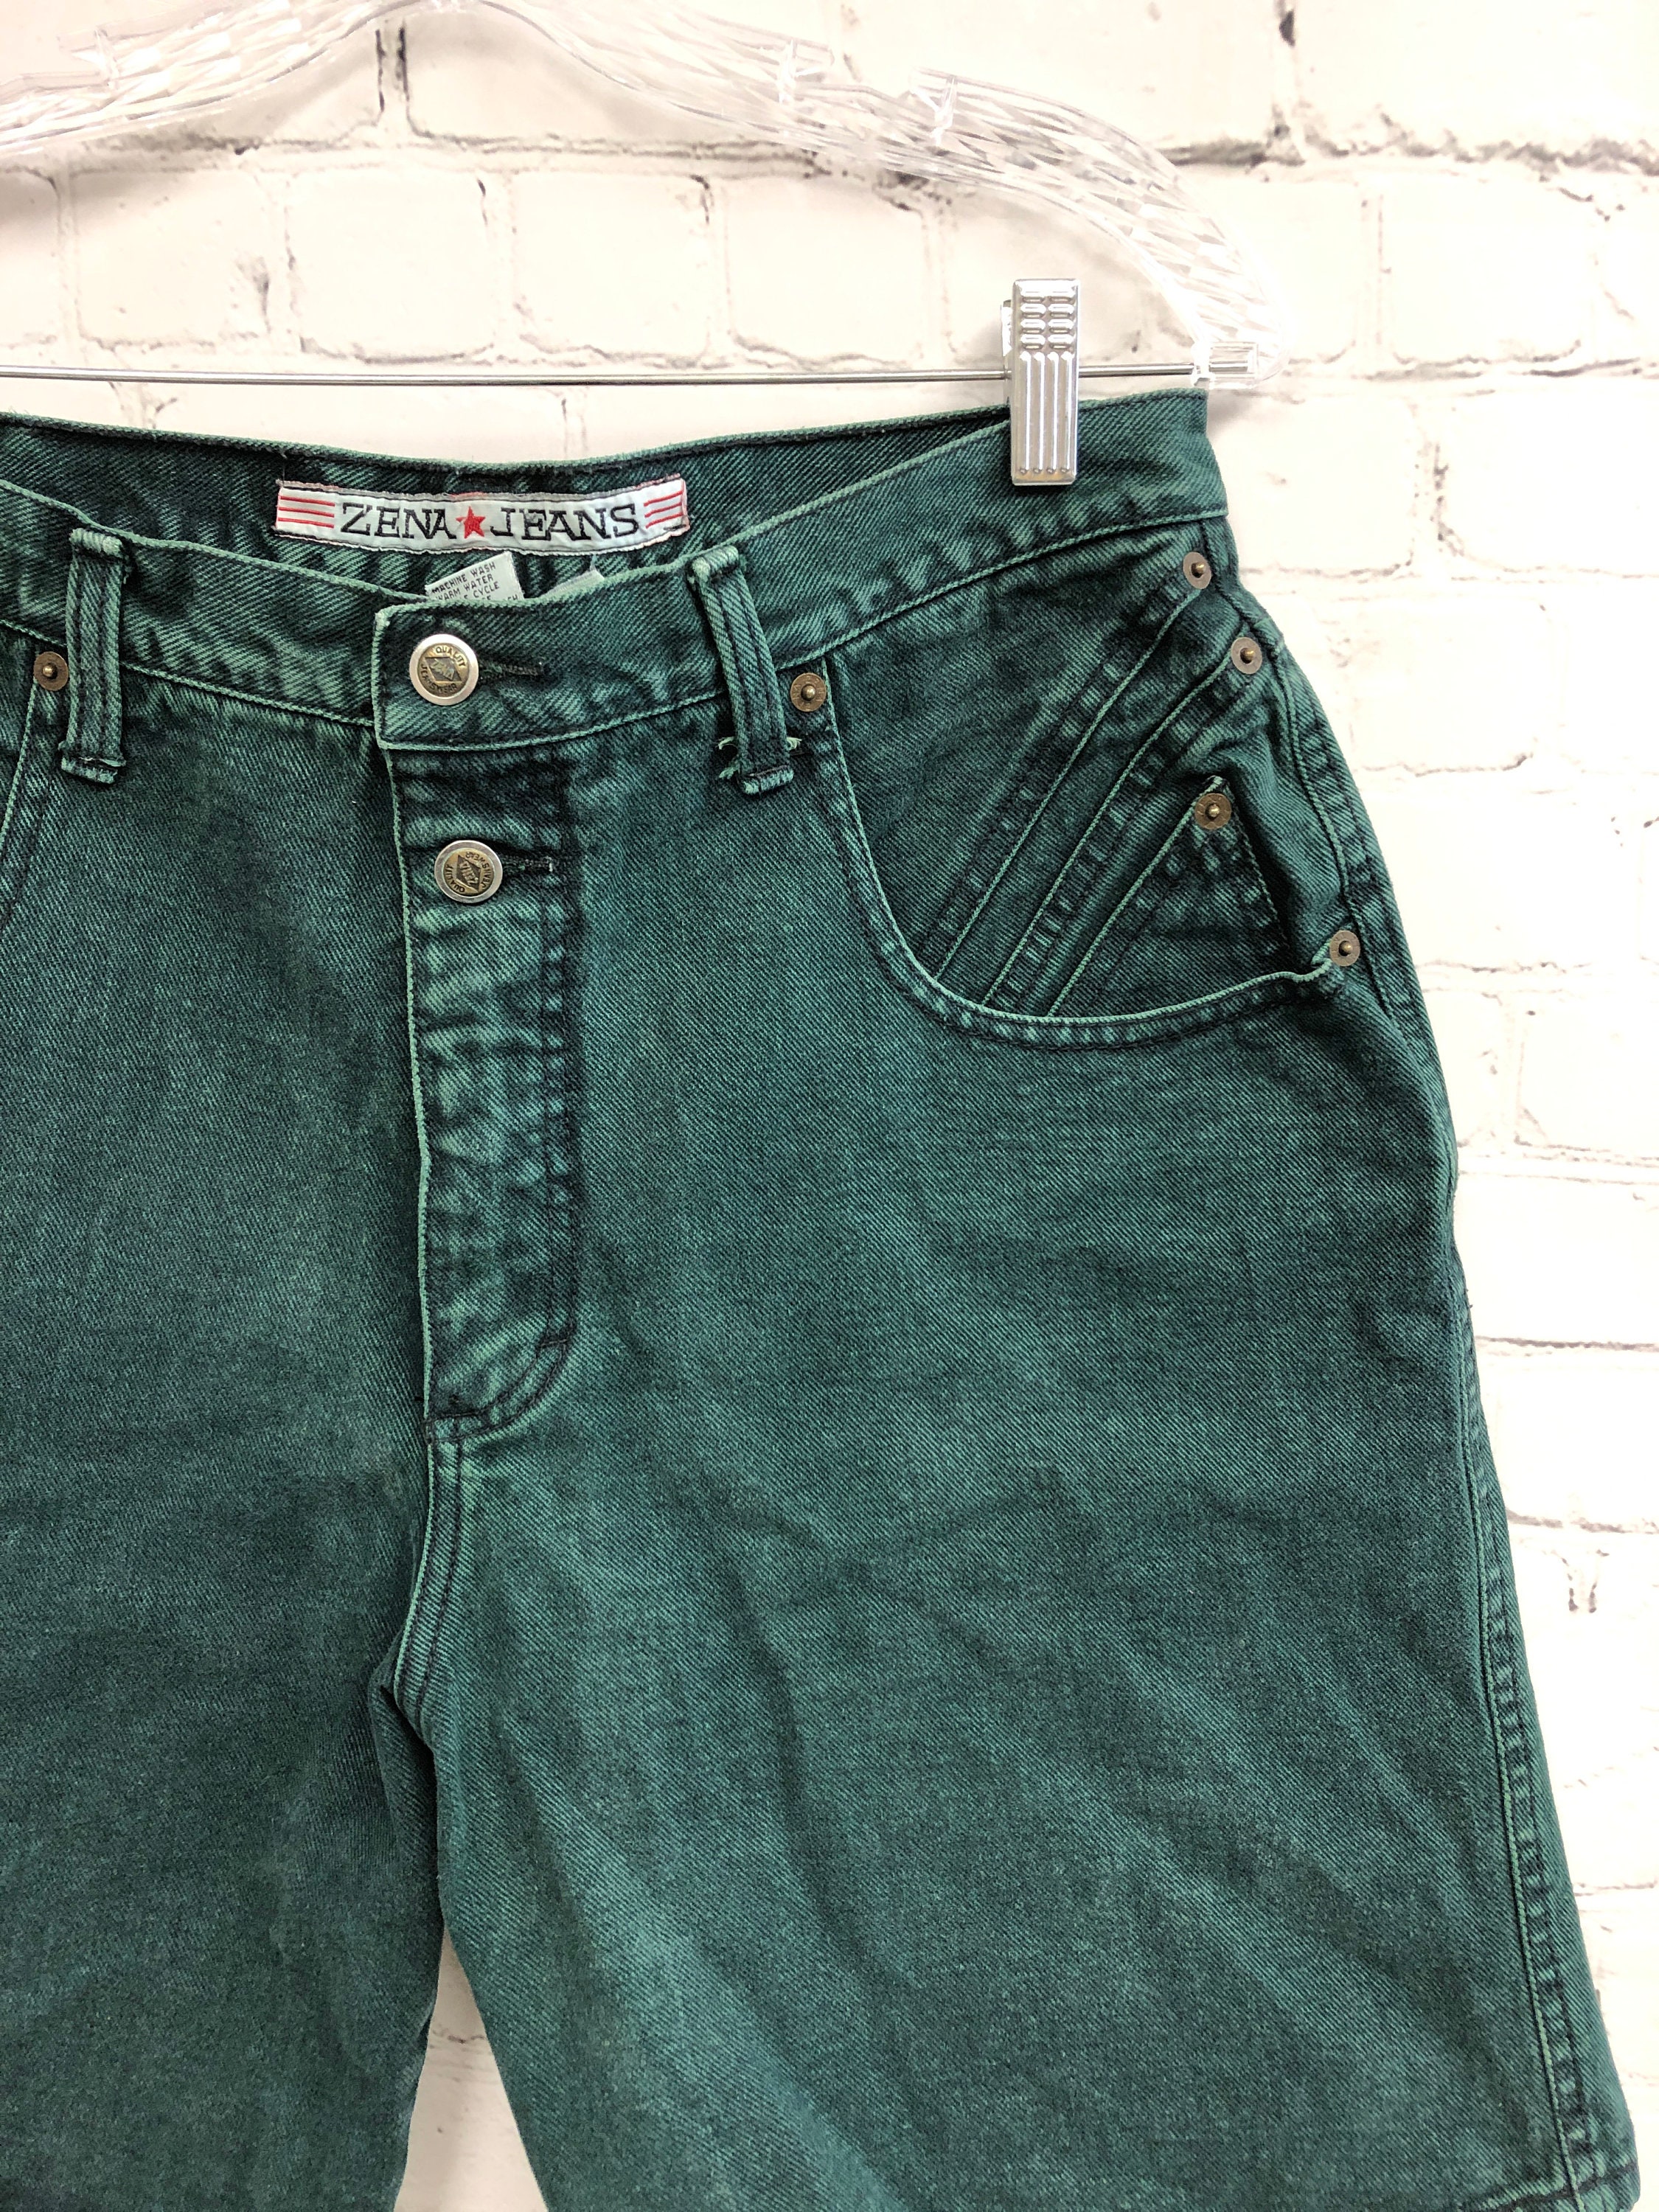 Vintage 80s/90s ZENA JEANS Forest Green Stone Wash Green | Etsy